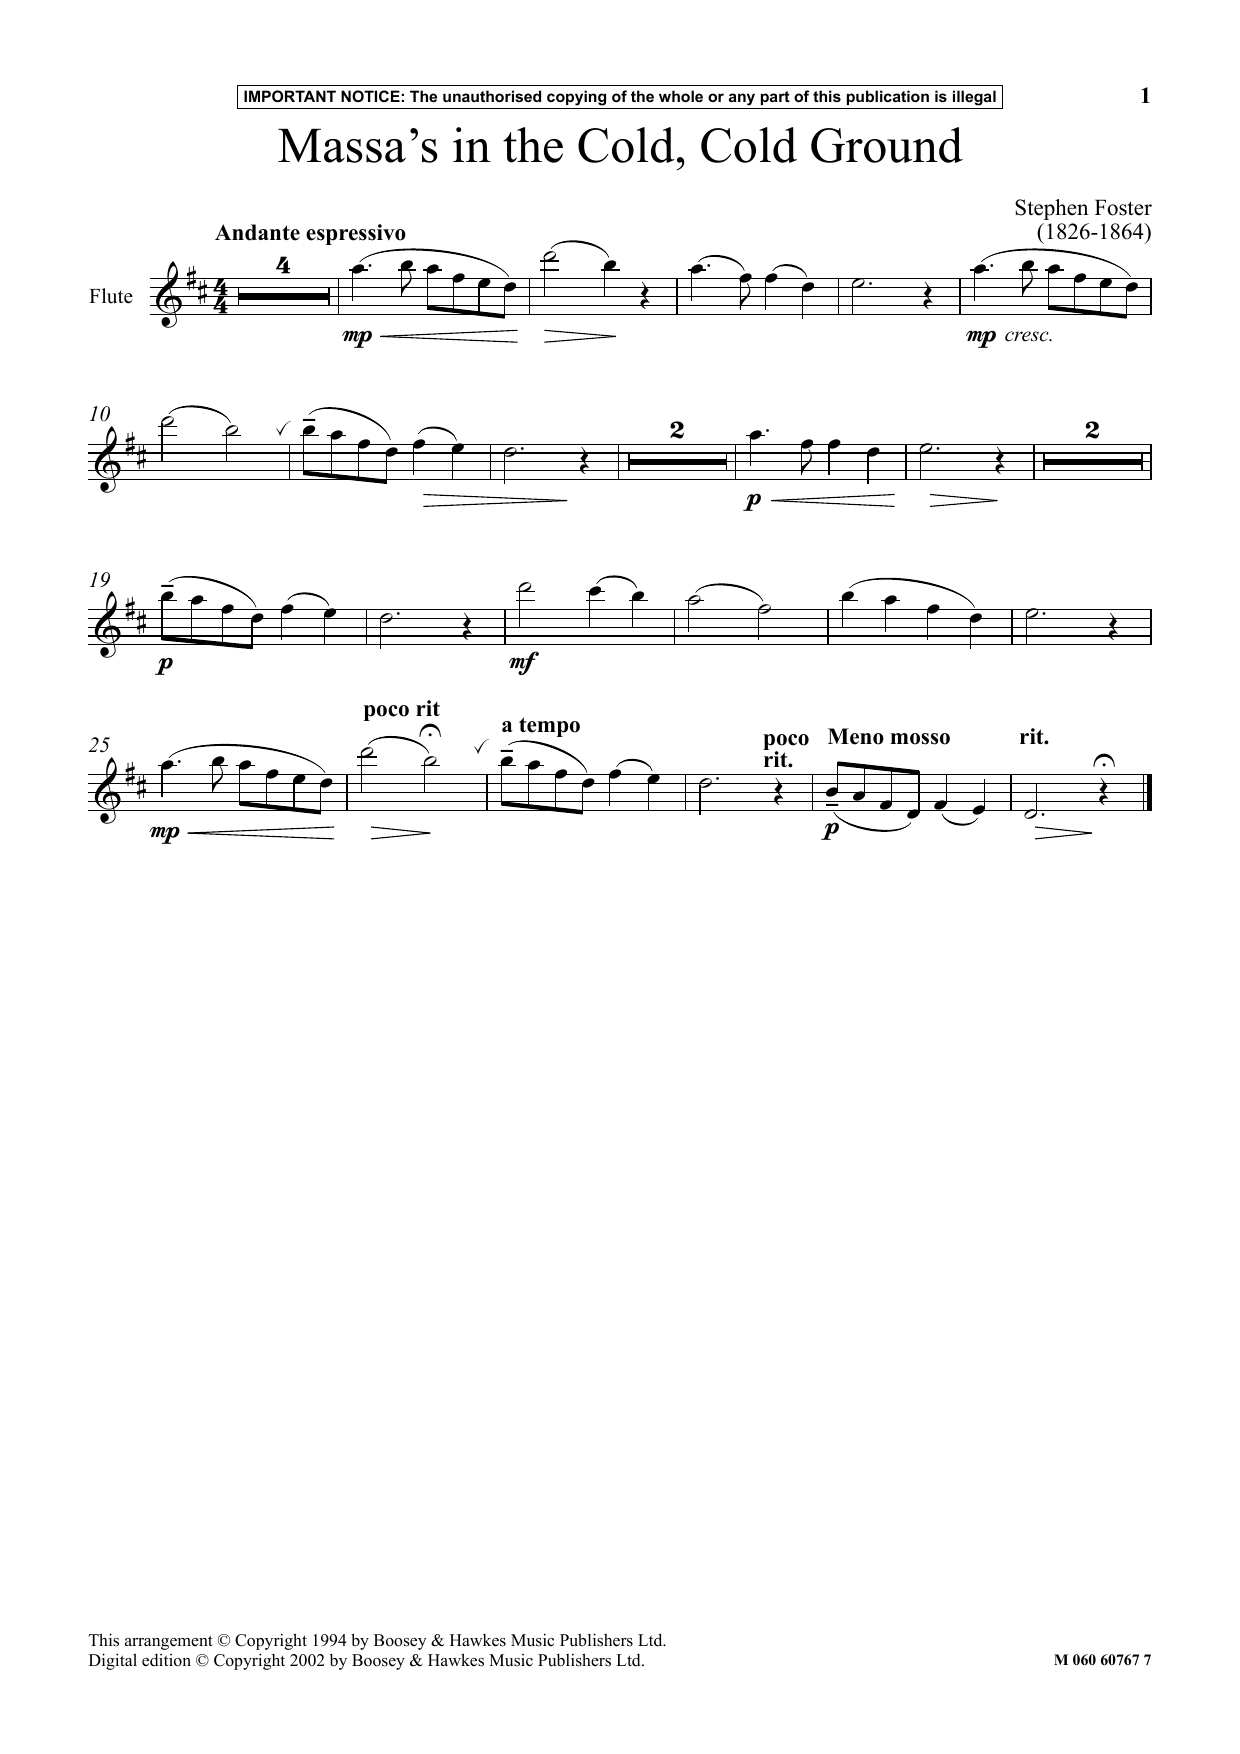 Download Stephen Foster Massa's In The Cold, Cold Ground Sheet Music